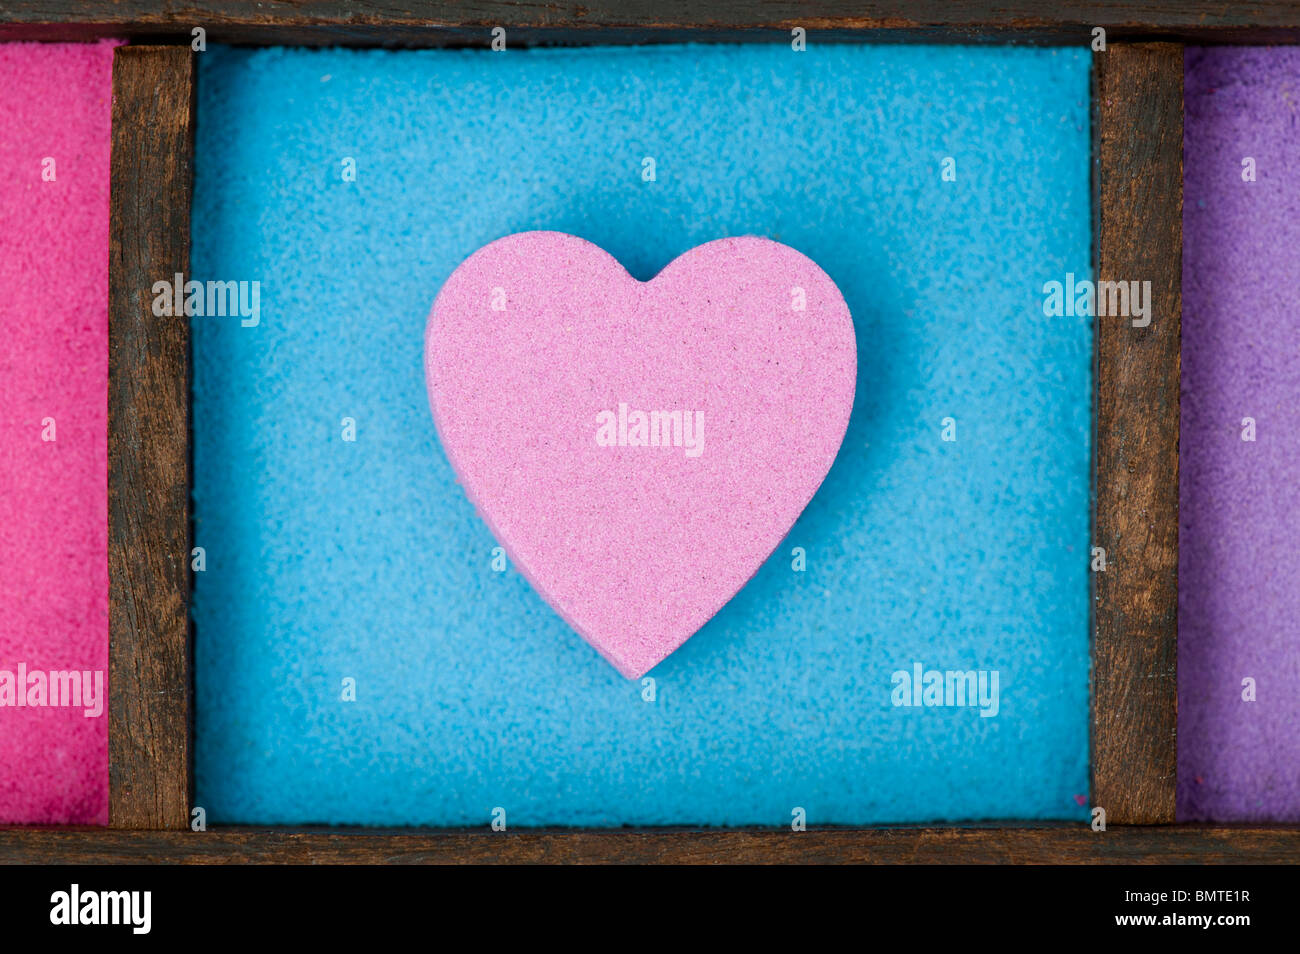 Pink heart shape on blue sand in a wooden tray Stock Photo